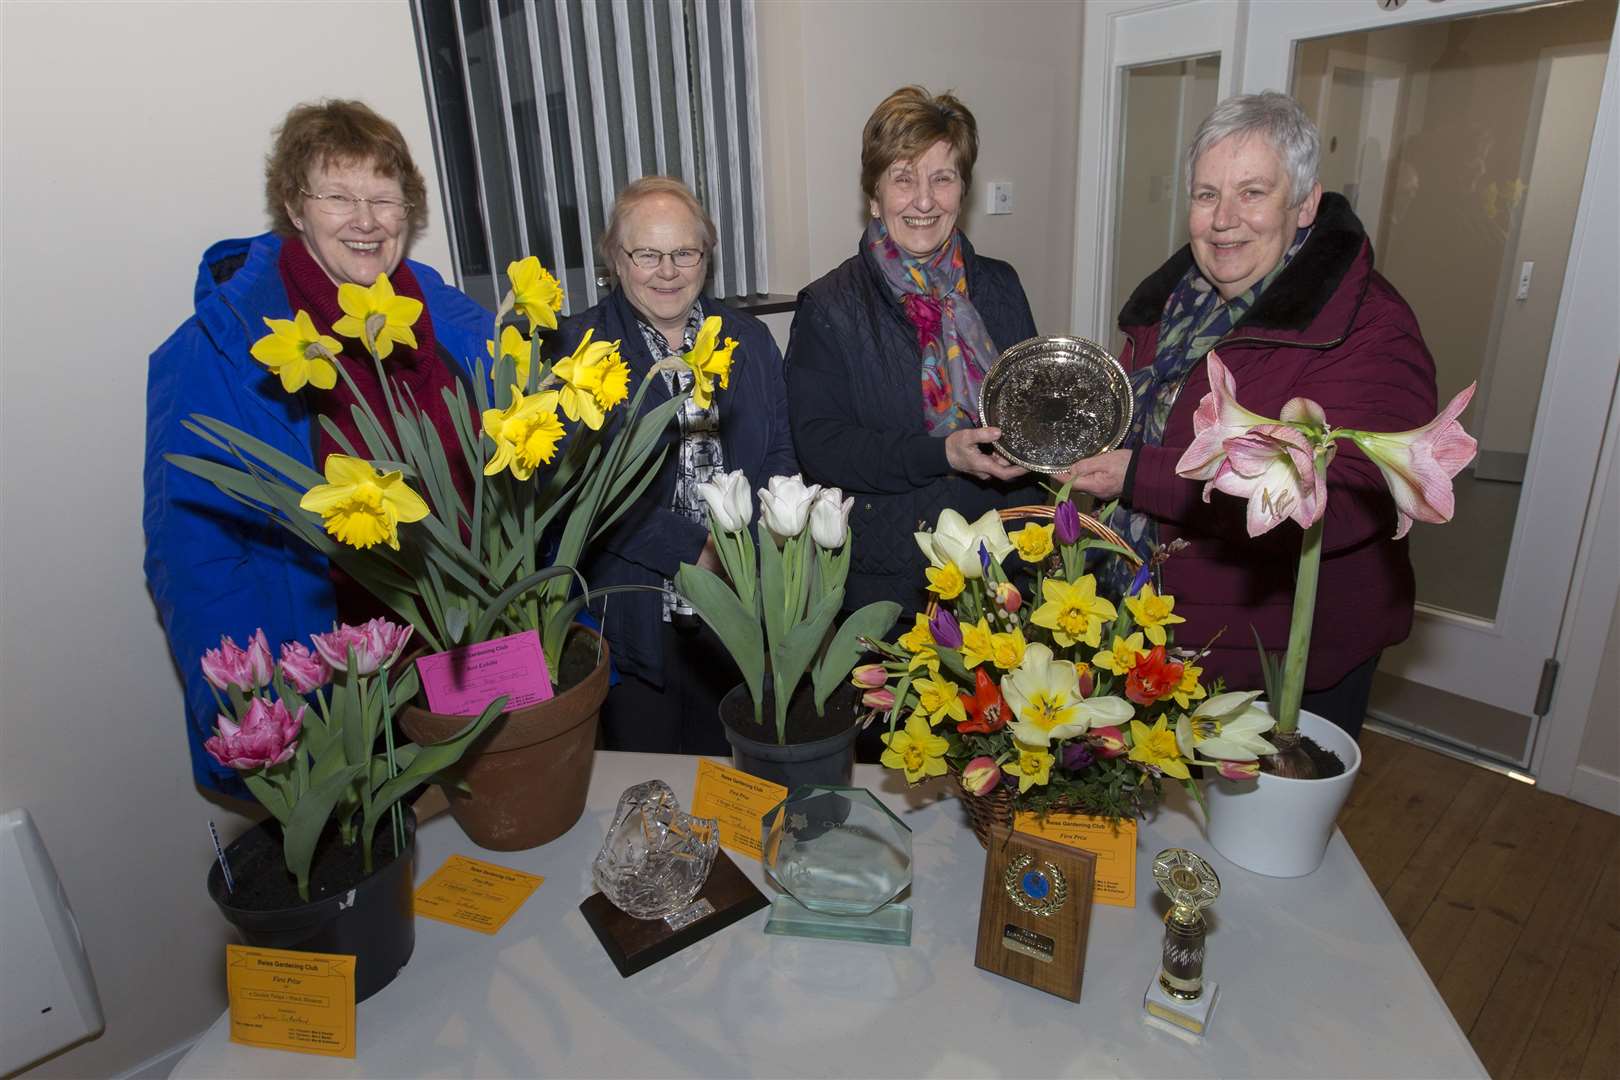 Marion Sutherland (second right) had a clean sweep of the trophies at Reiss Gardening Club's annual bulb show. She received the trophies for most points in bulbs, most points in floral art and most points in baking and preserves, as well as the best exhibit trophy – meaning that the winner of the trophy for most points overall was never in any doubt. She received her trophies from Lorna Swanson, one of the judges. Looking on are the other two judges, Mary Shearer (left) and Anne Gunn. Picture: Robert MacDonald / Northern Studios